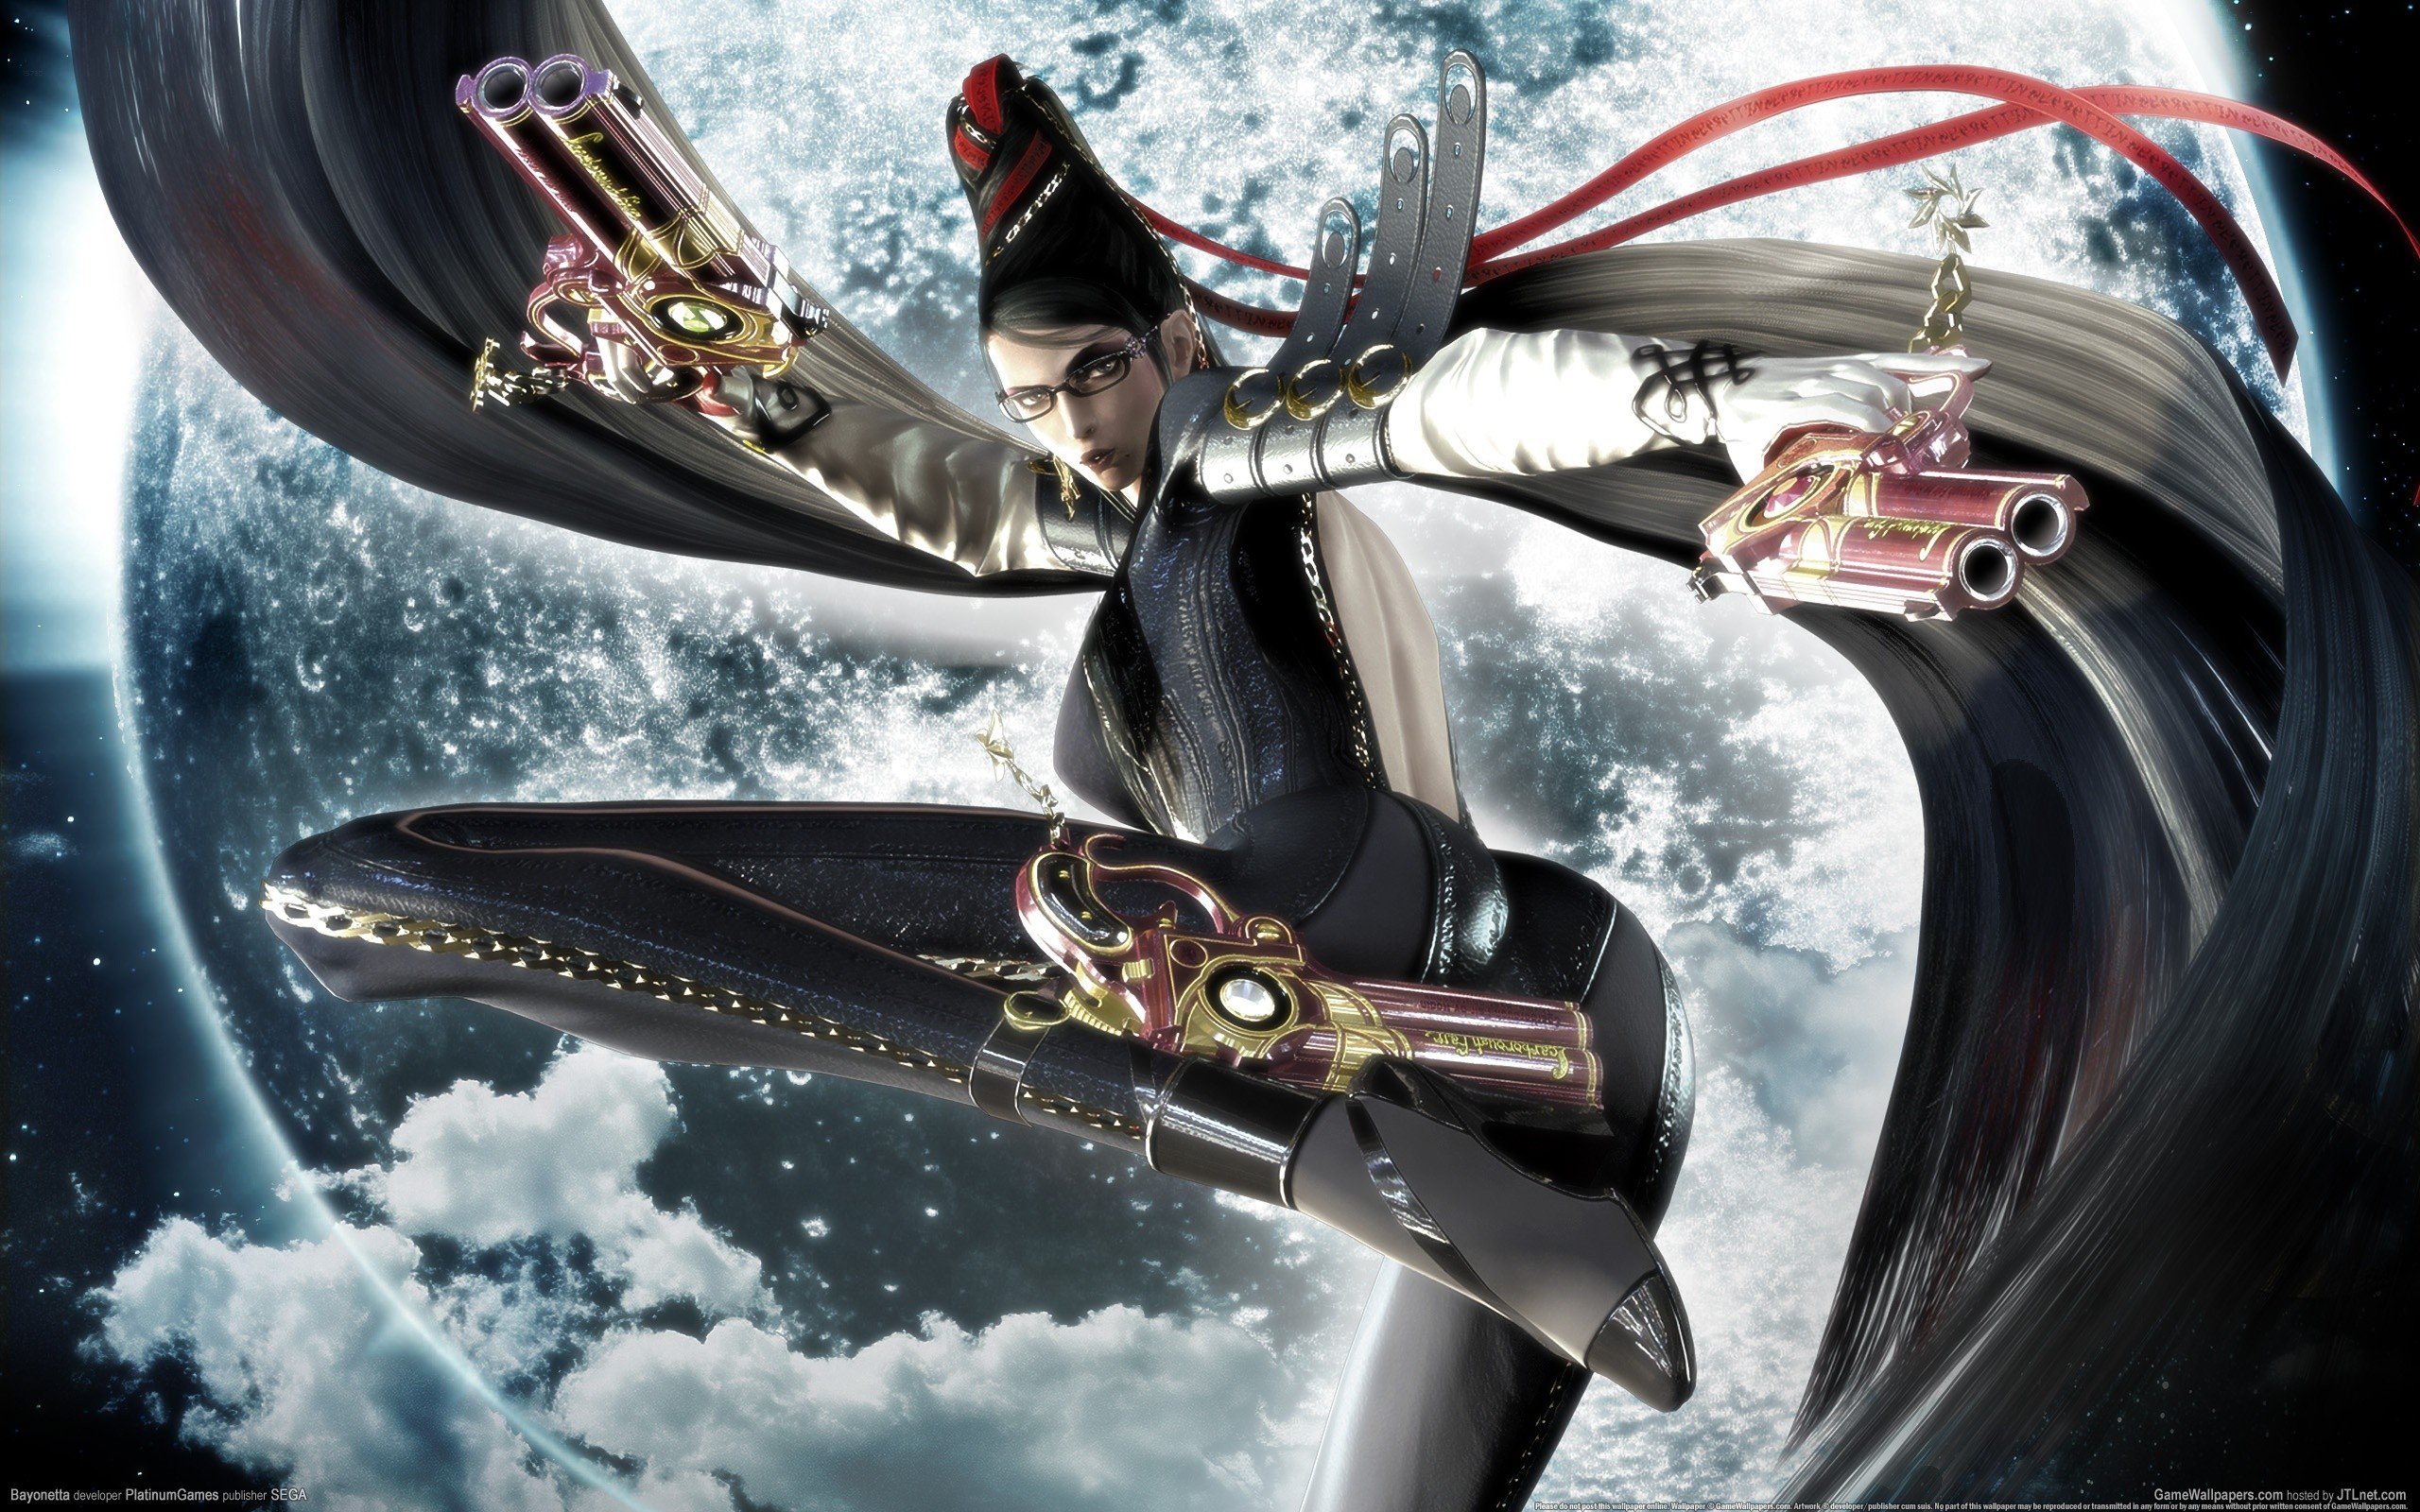 download bayonetta 2 ps4 for free